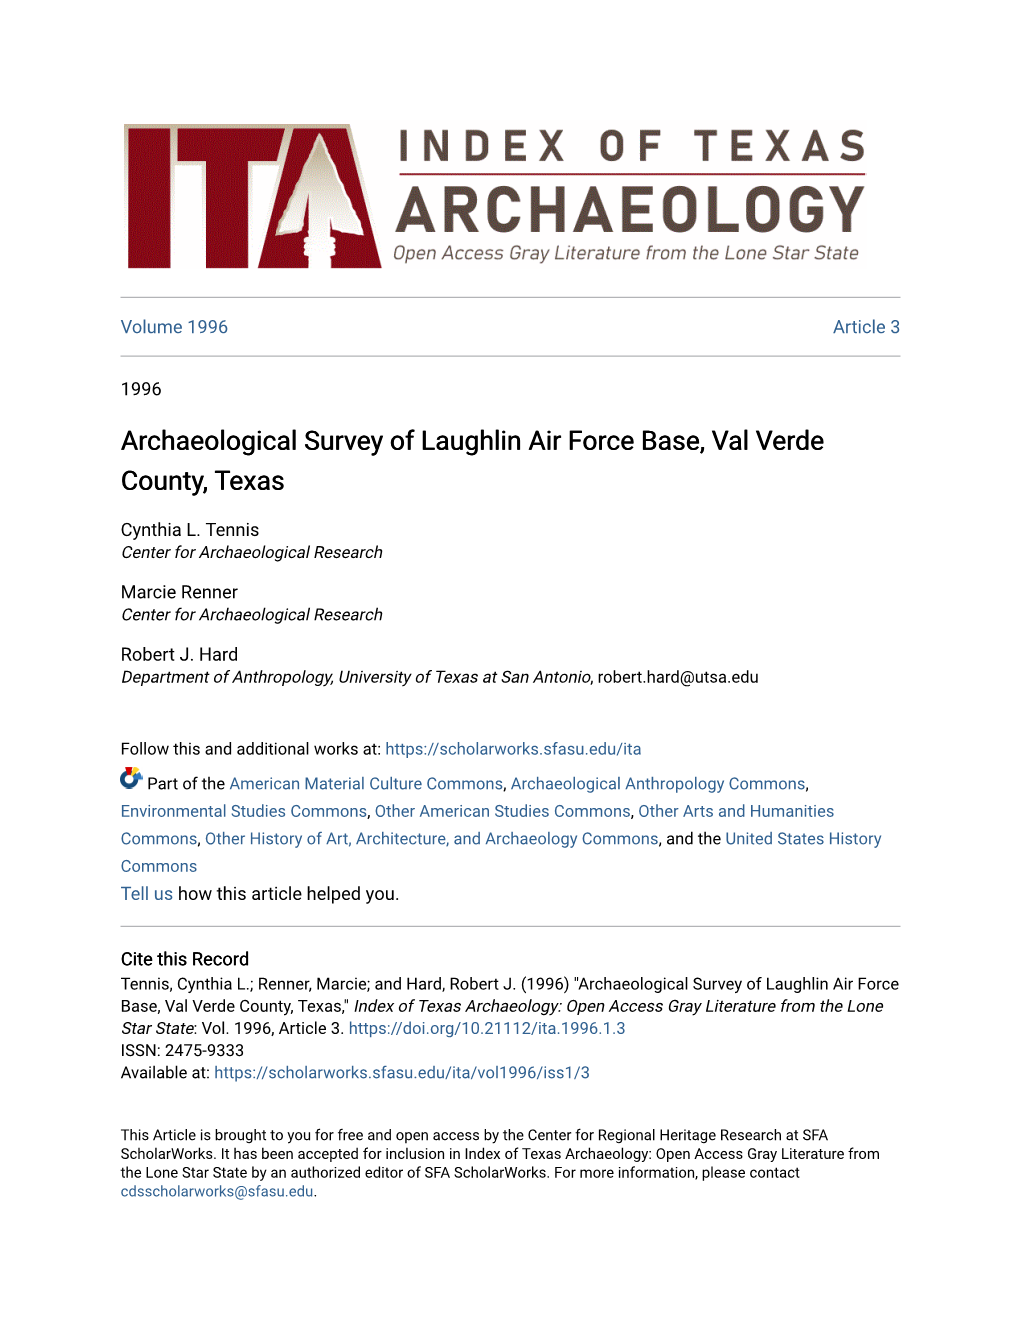 Archaeological Survey of Laughlin Air Force Base, Val Verde County, Texas